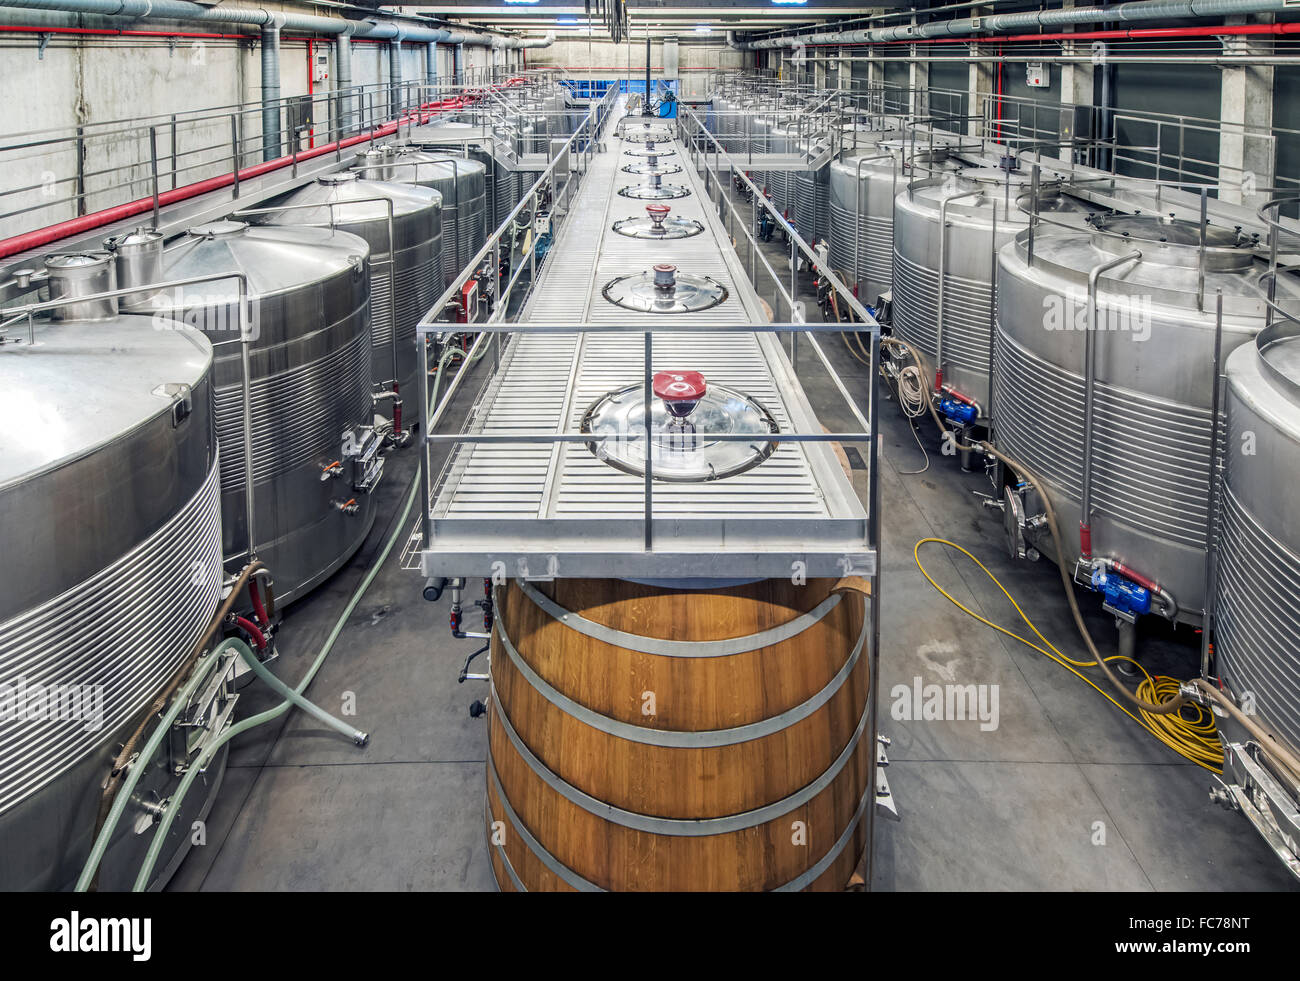 Vats in wine processing plant Stock Photo